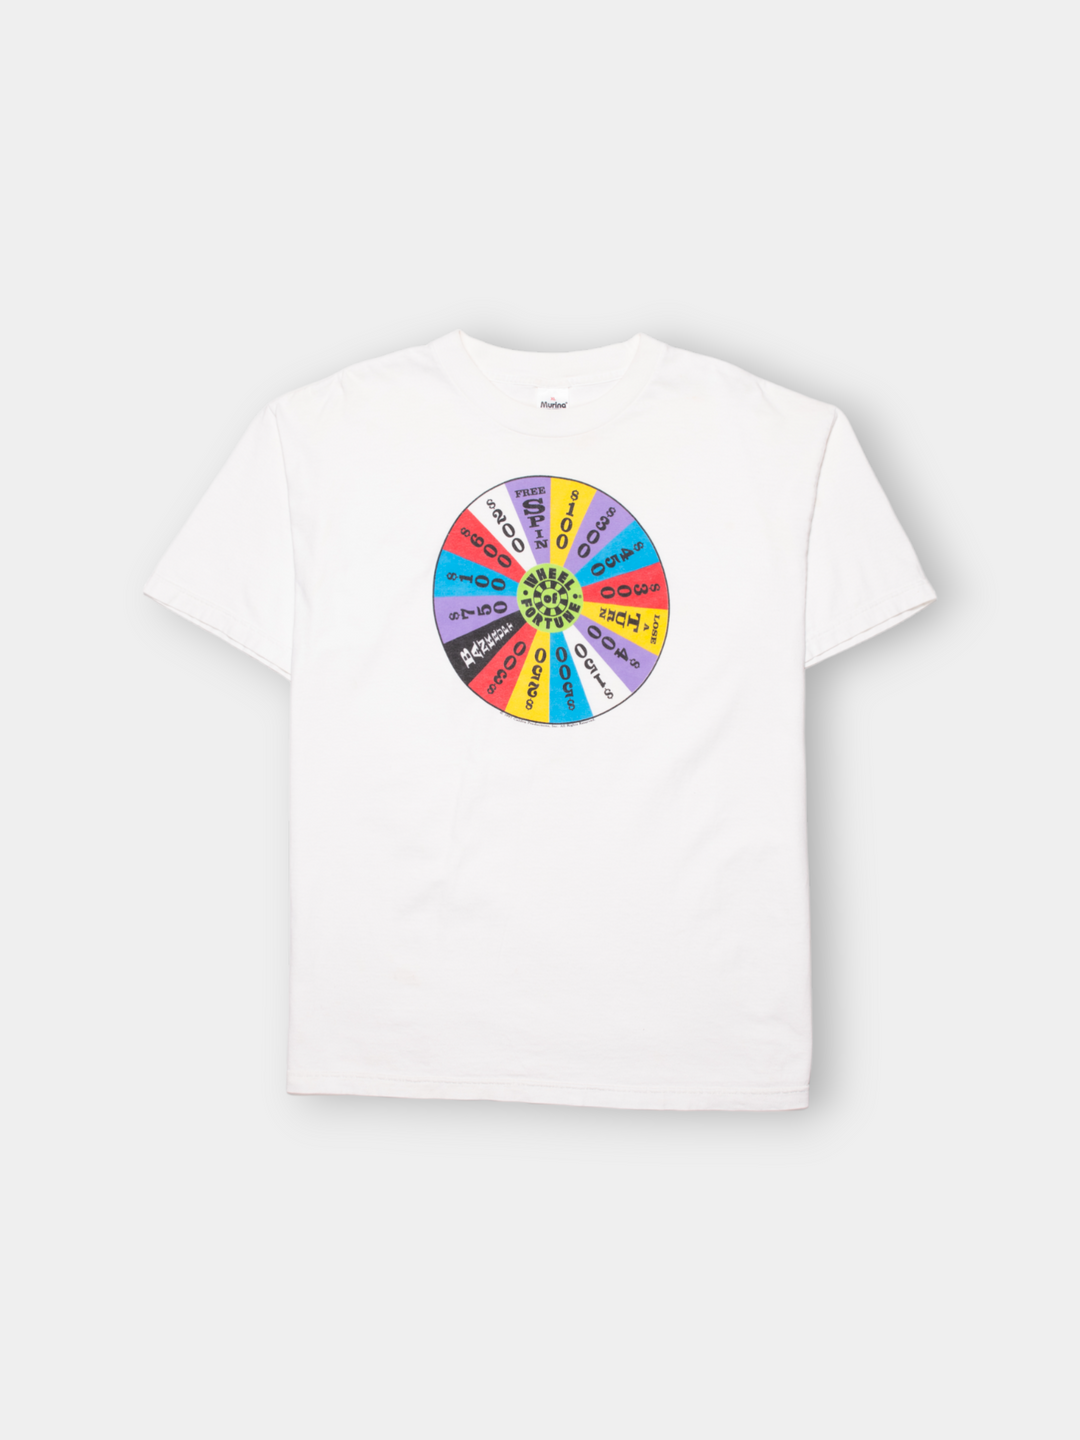 '97 Wheel of Fortune Tee (XL)